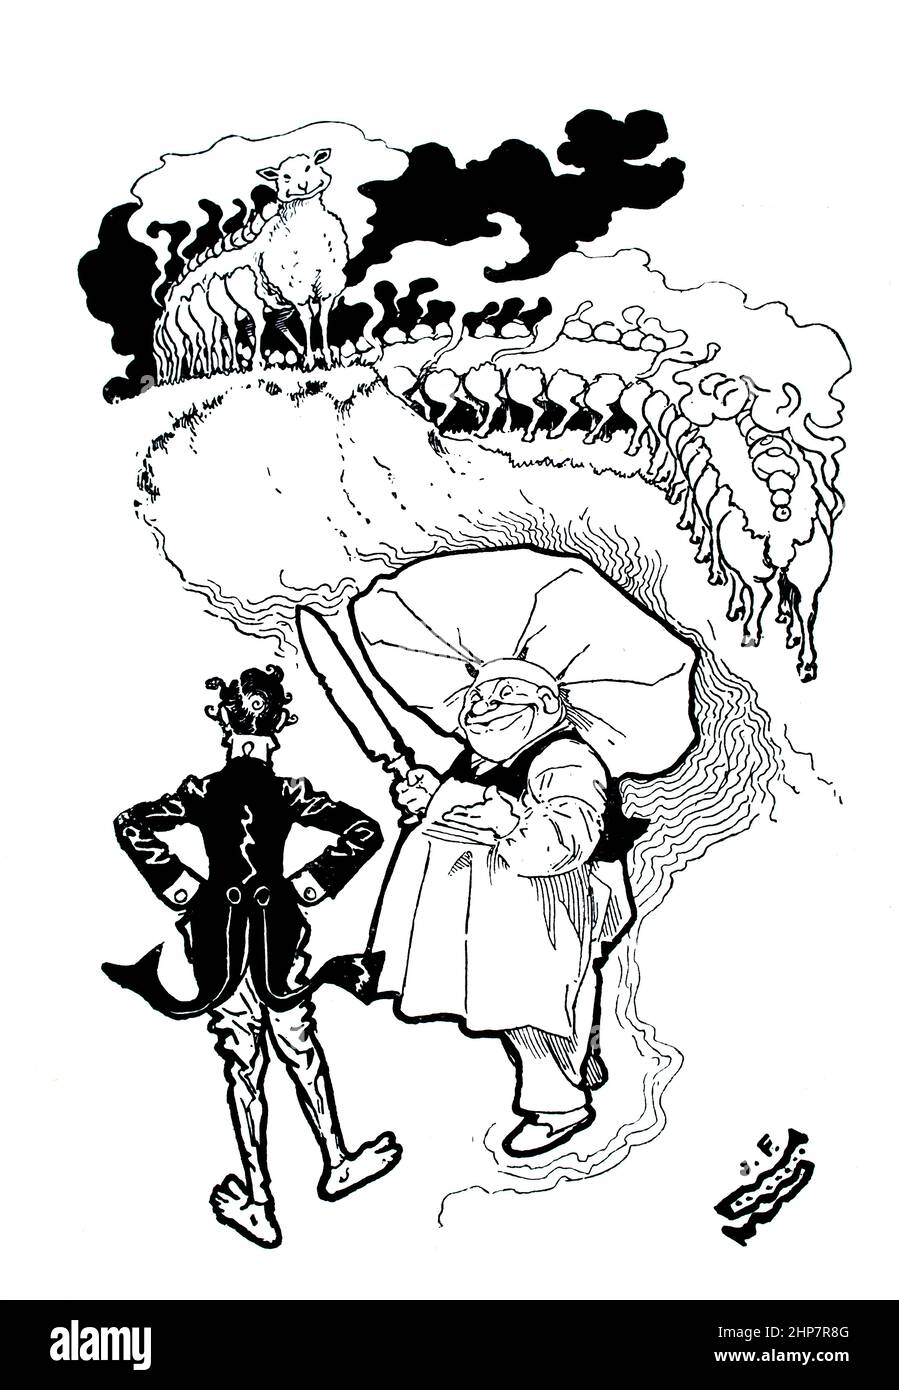 Ill1610 The flame-flower and other stories, 1896 fantasy short story illustration by English cartoonist and writer James F. Sullivan Stock Photo